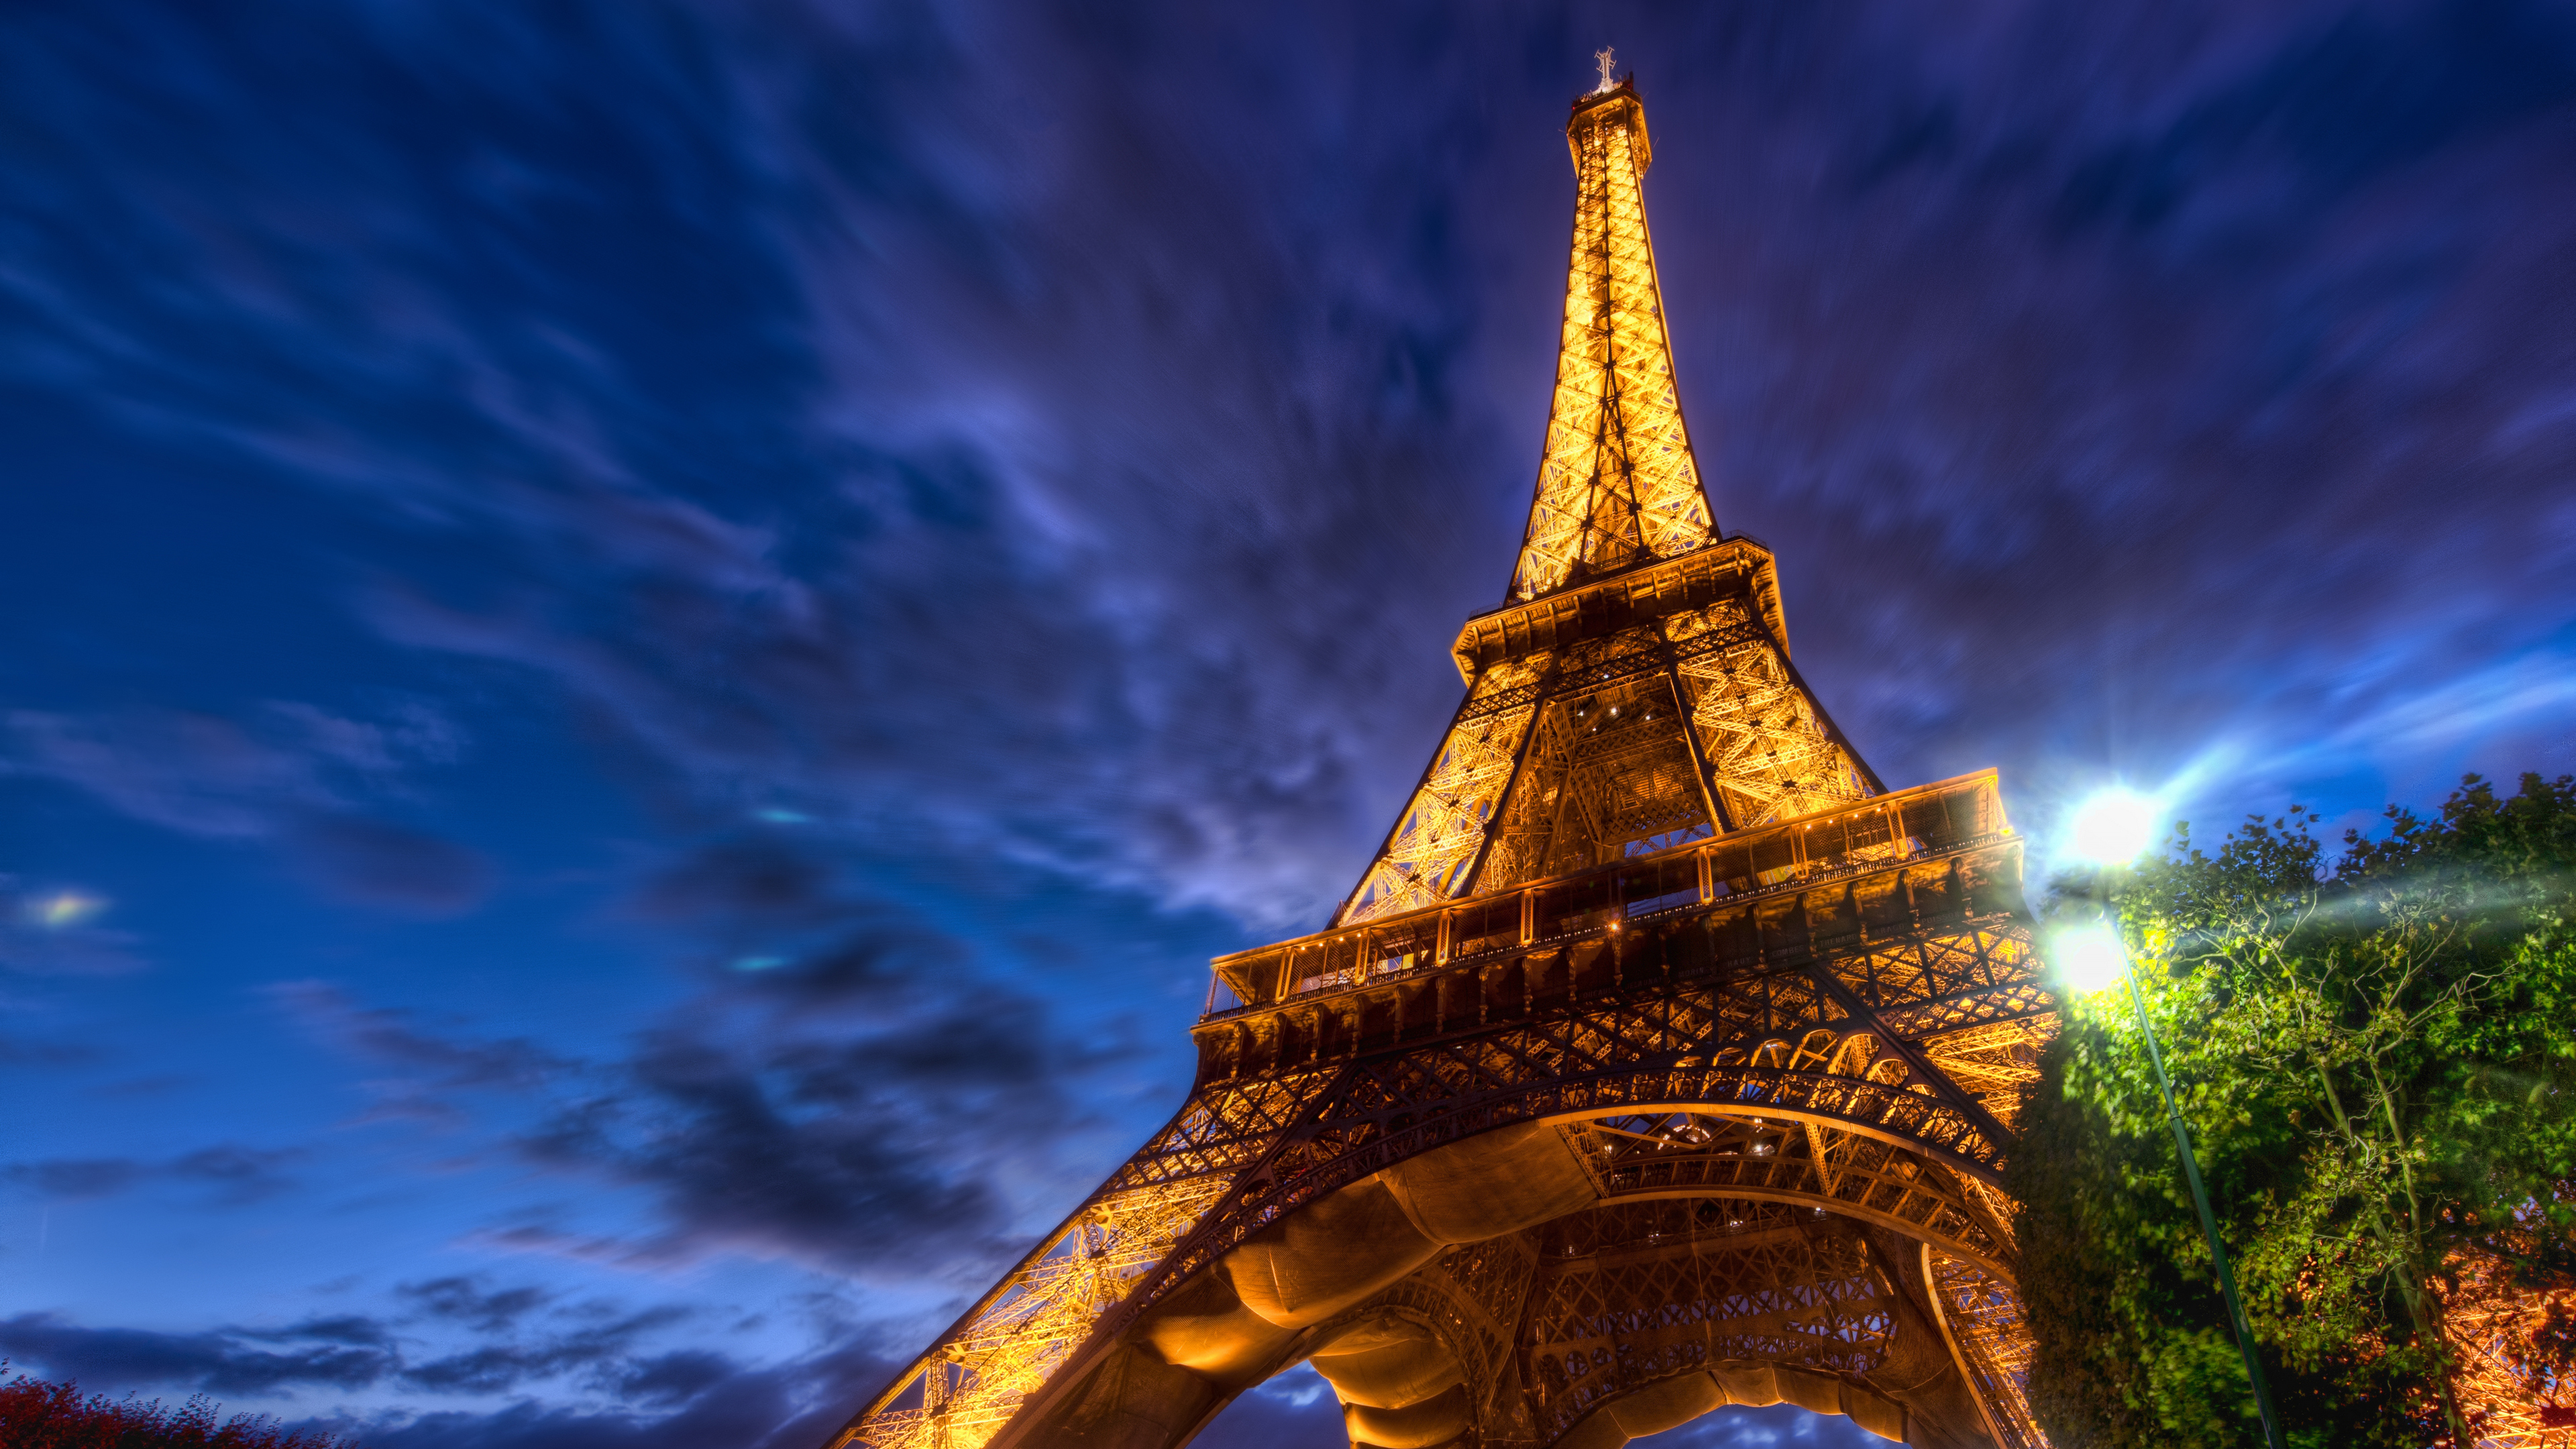 Trey Ratcliff Photography Cityscape France Paris Eiffel Tower Night Lights Building Sky Clouds From  3840x2160